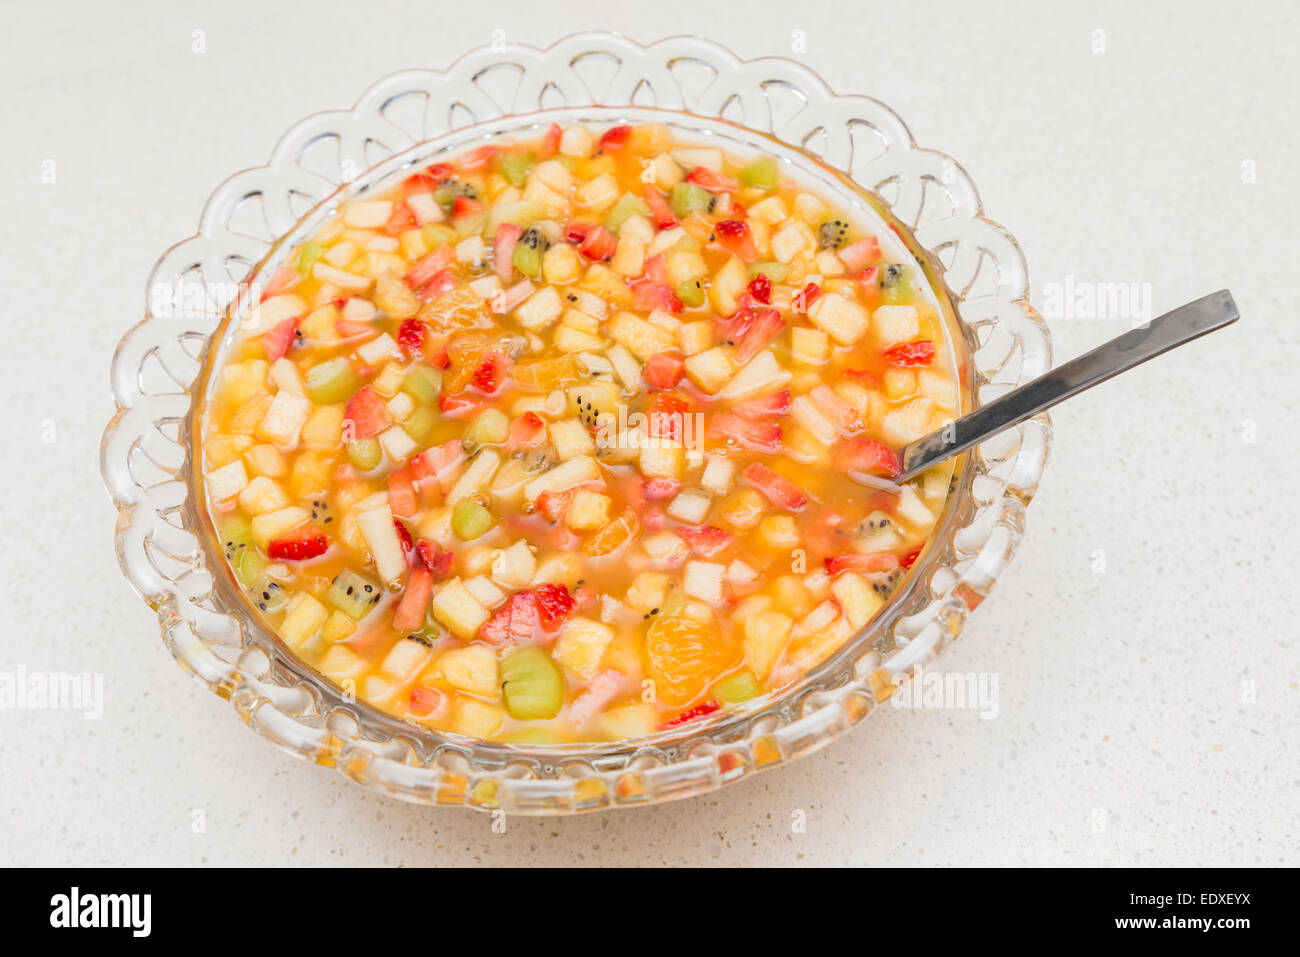 fruit salad of various kinds on a plate decorated Stock Photo